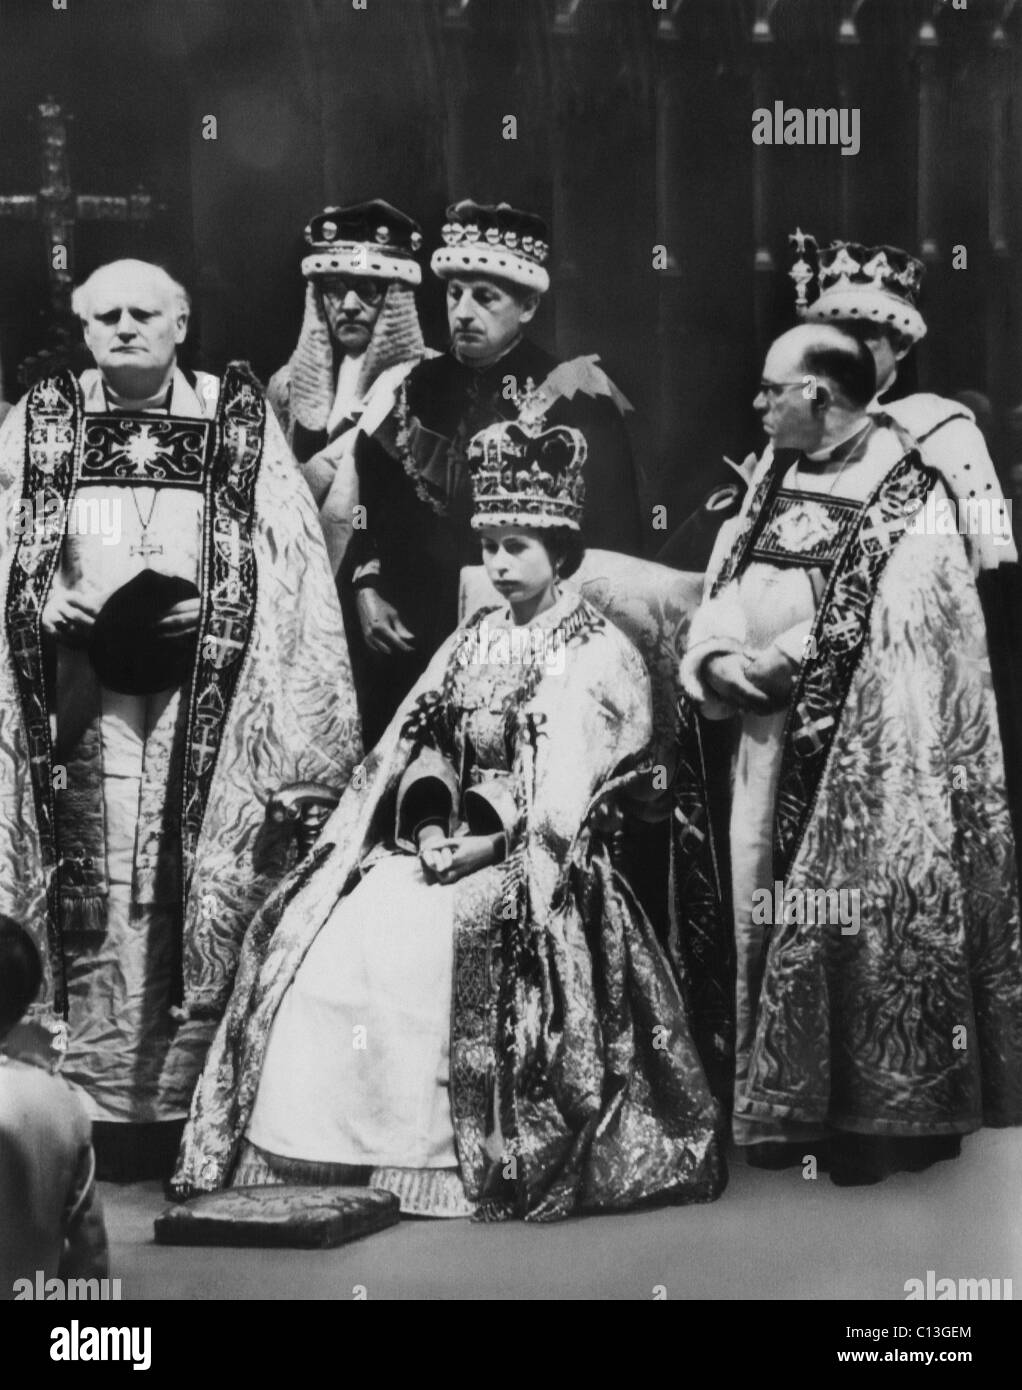 British Royalty. Front row, from left: Bishop of Durham Arthur Michael Ramsey, Queen Elizabeth II of England, Bishop of Bath and Wells Harold William Bradfield, during the Queen's coronation, Westminster Abbey, London, England, June 2, 1953. Stock Photo